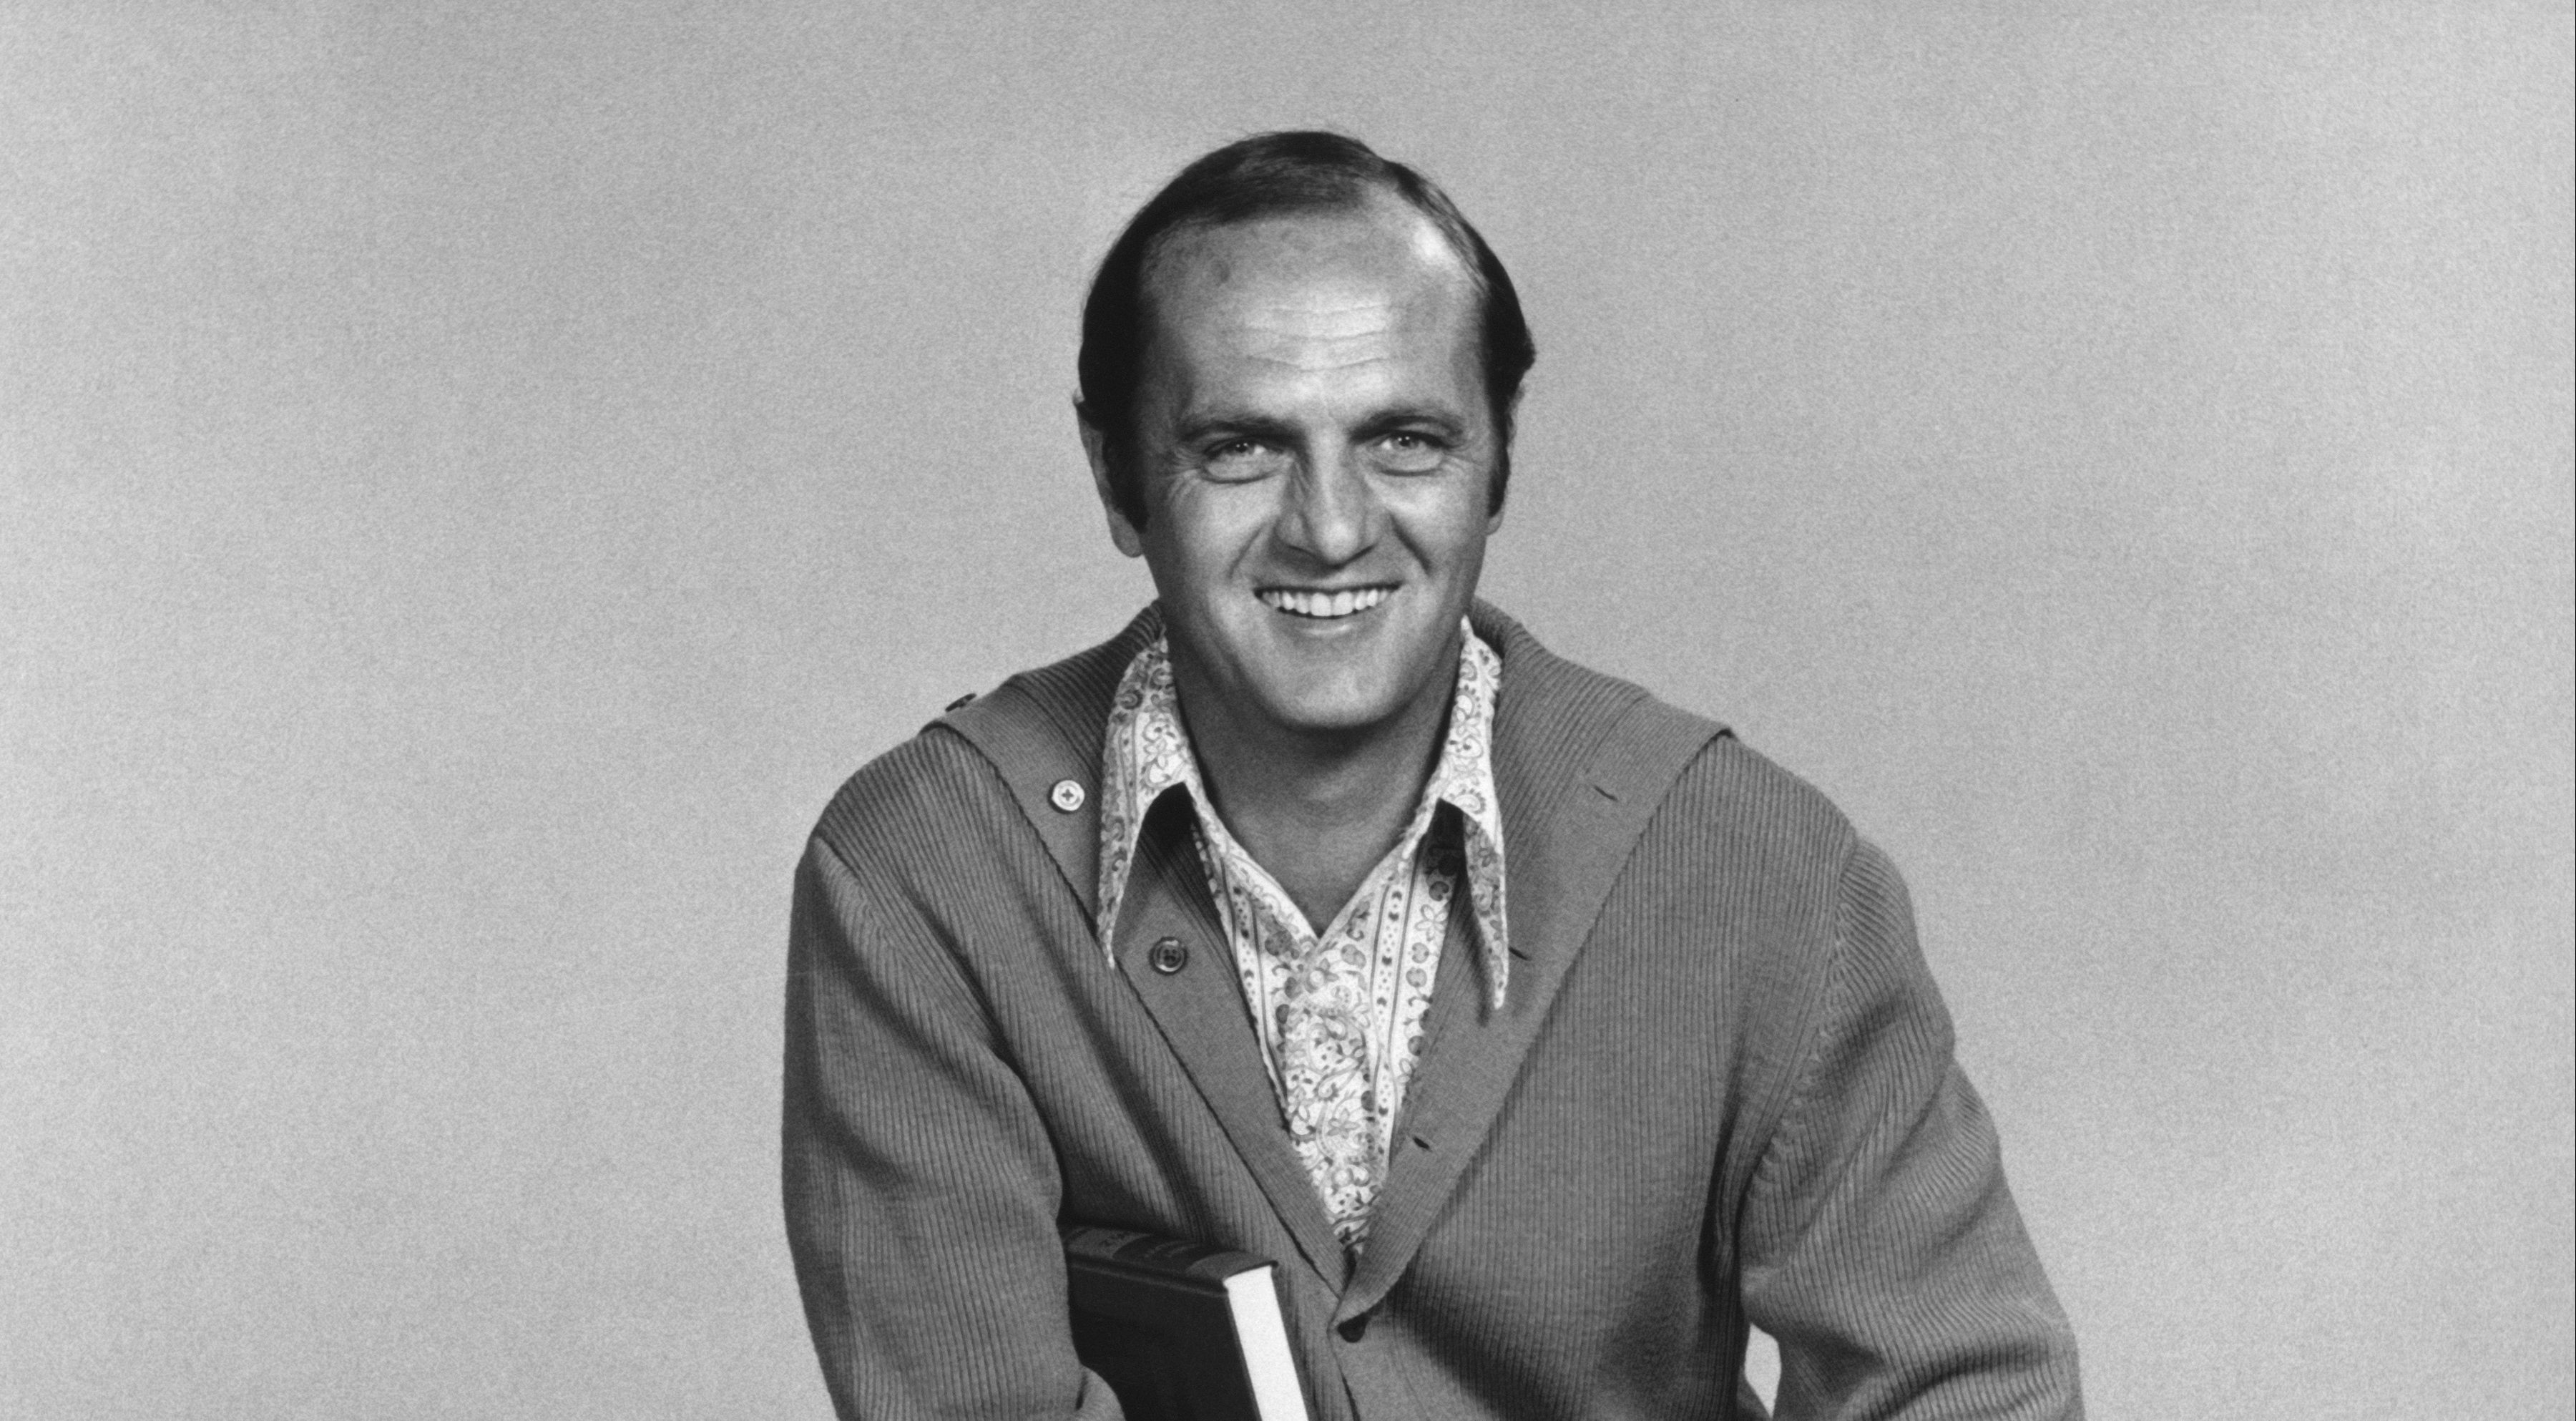 Bob Newhart 1970's smiling studio publicity portrait. (Photo by Screen Archives/Getty Images)